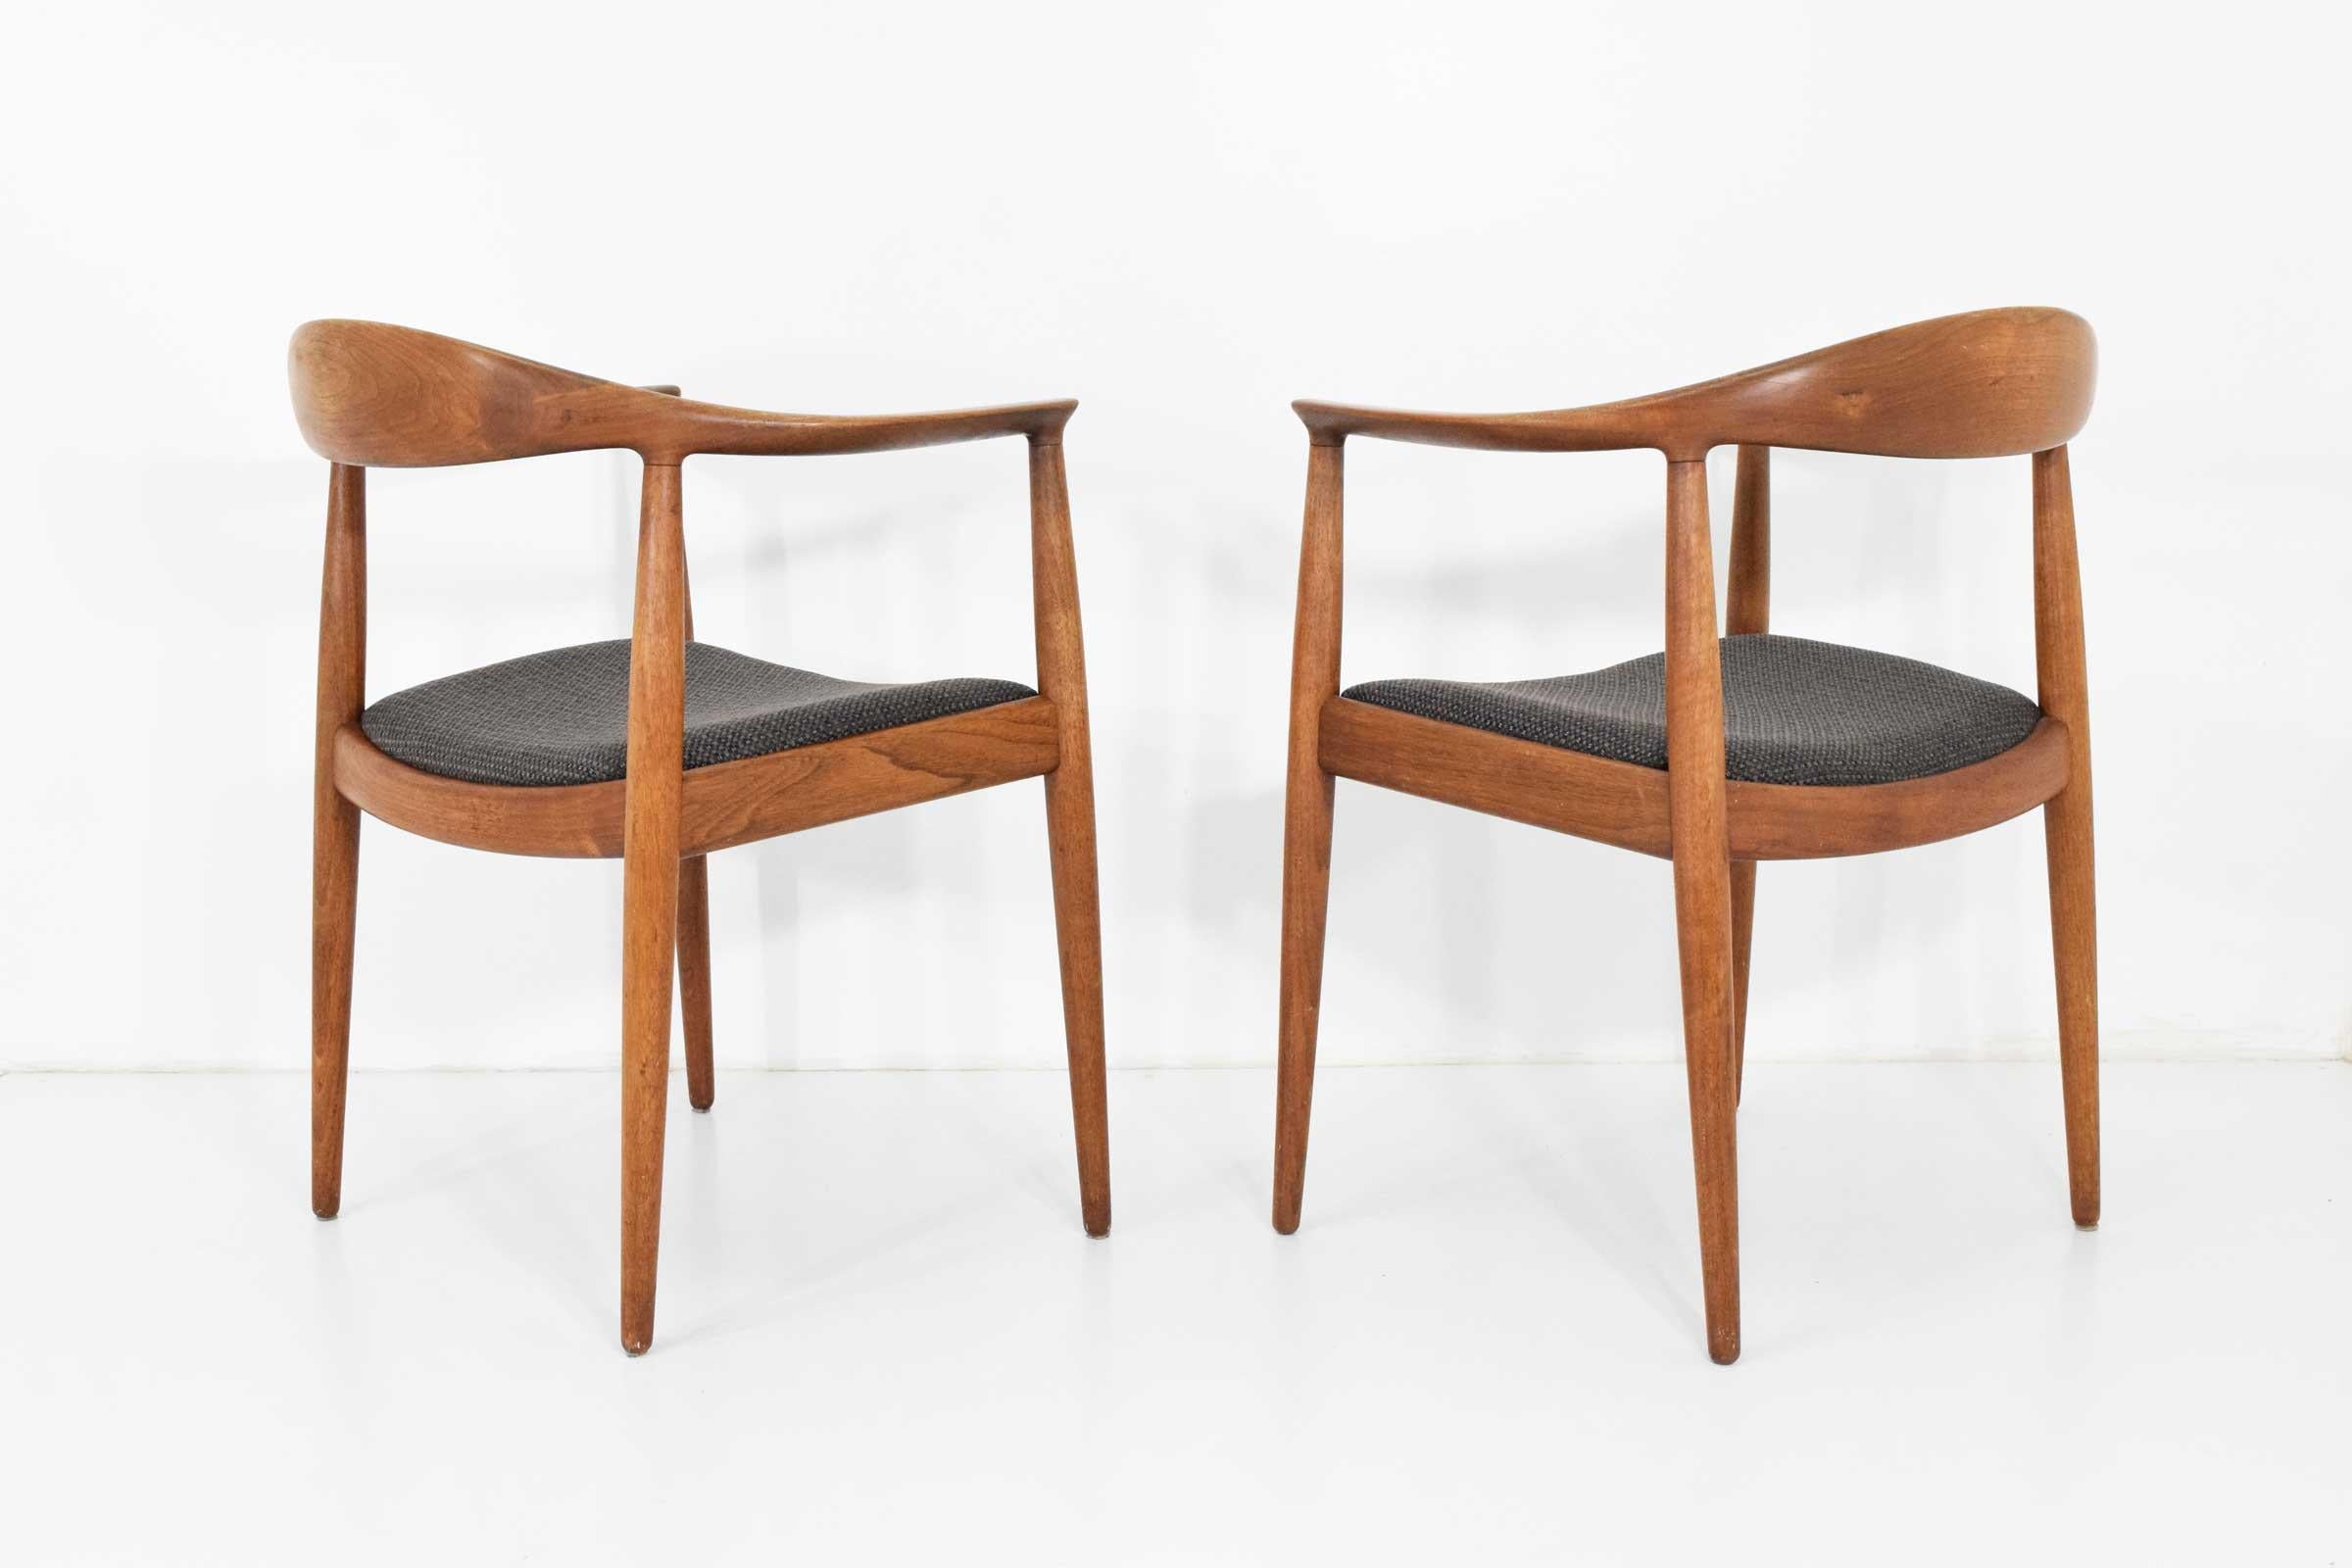 Hans Wegner Round Chairs 8 Available 6